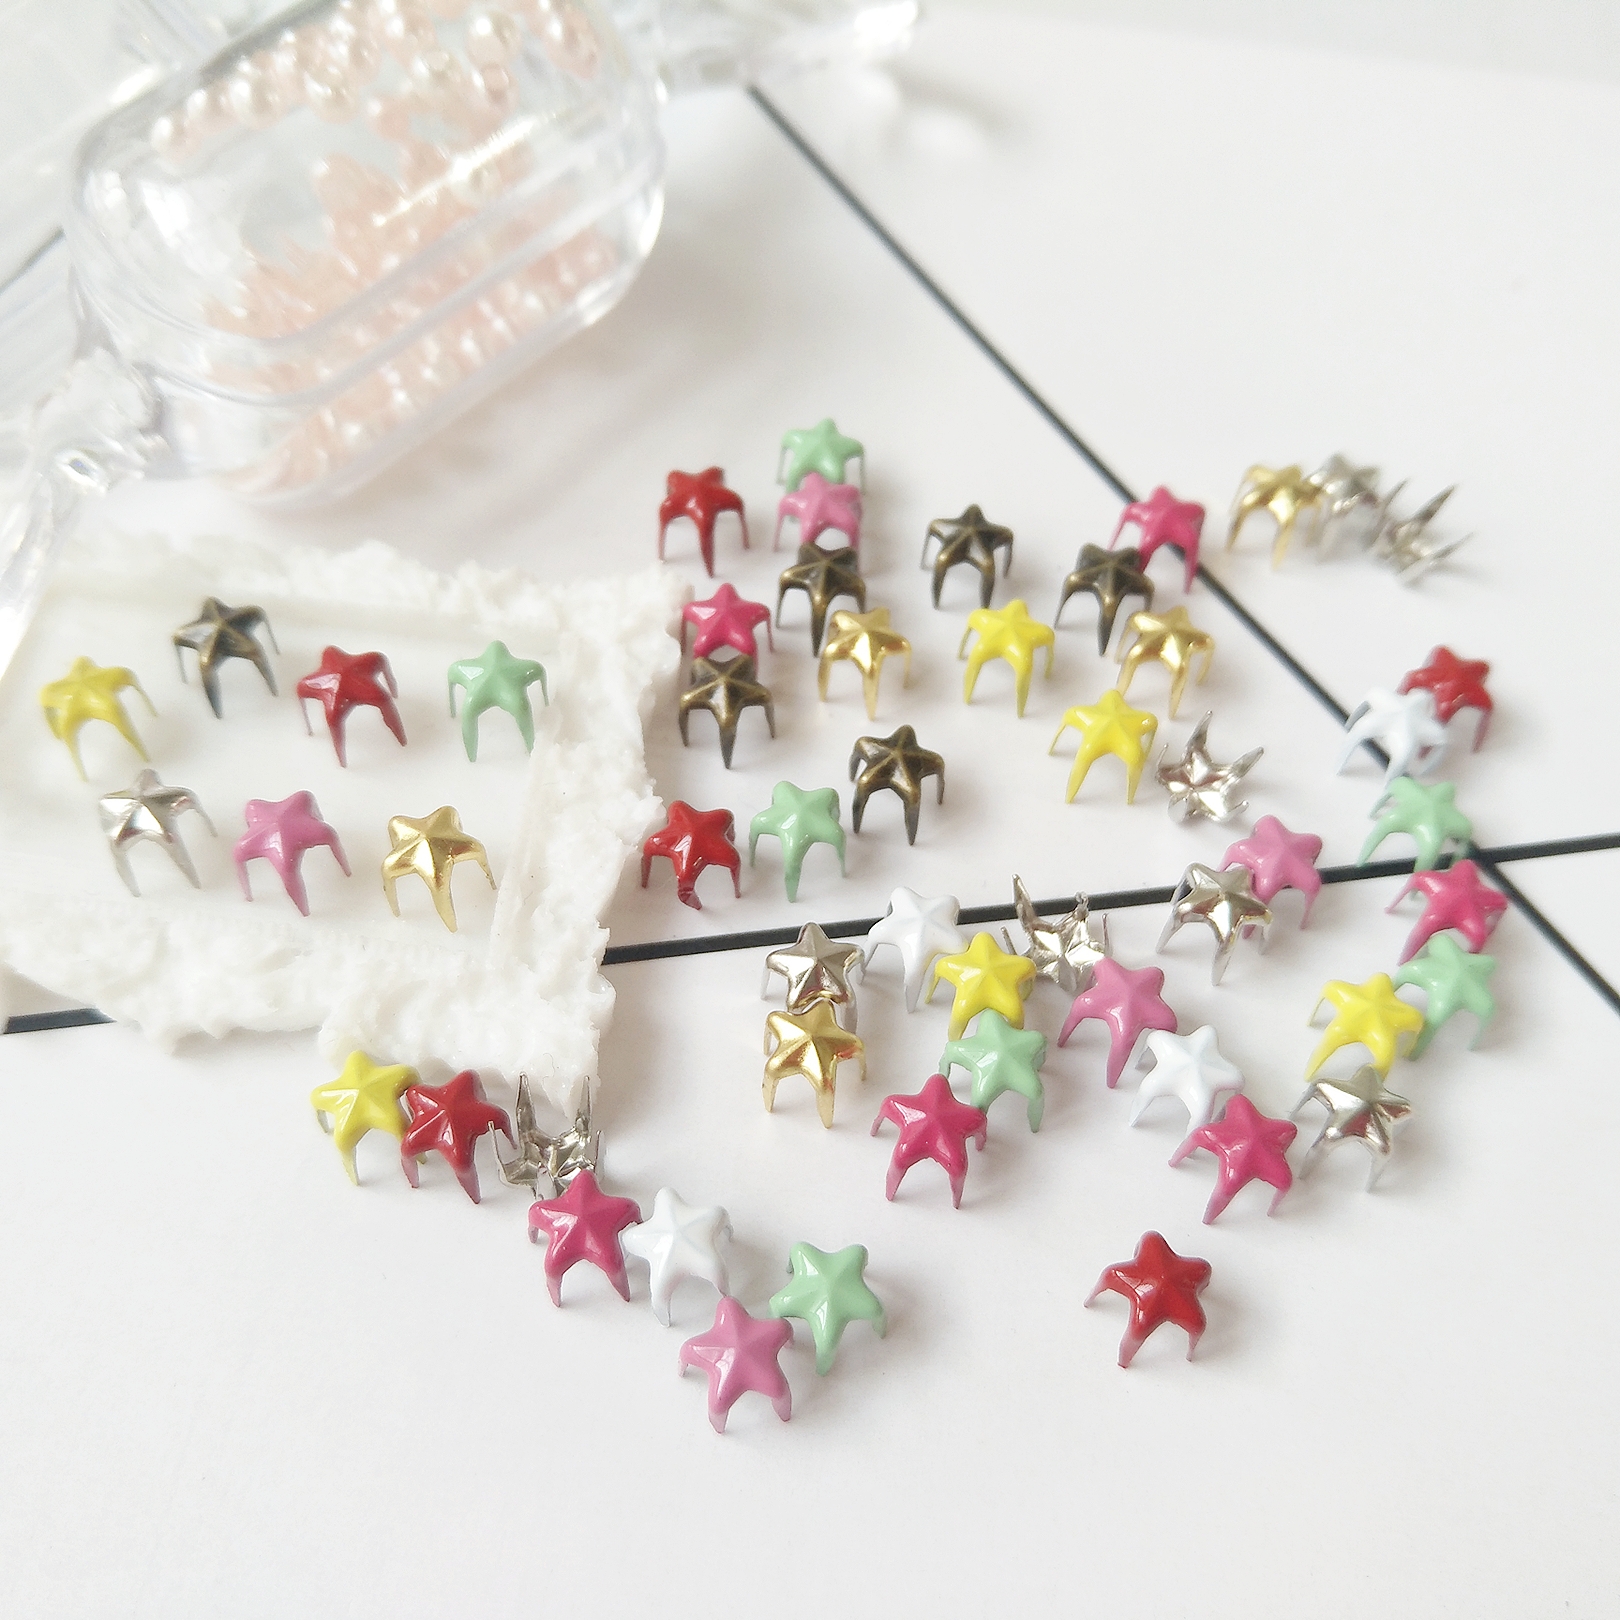 (Five-pointed star nails) bjd doll diy baby clothes accessories mini five-pointed star metal nails baby clothes buttons